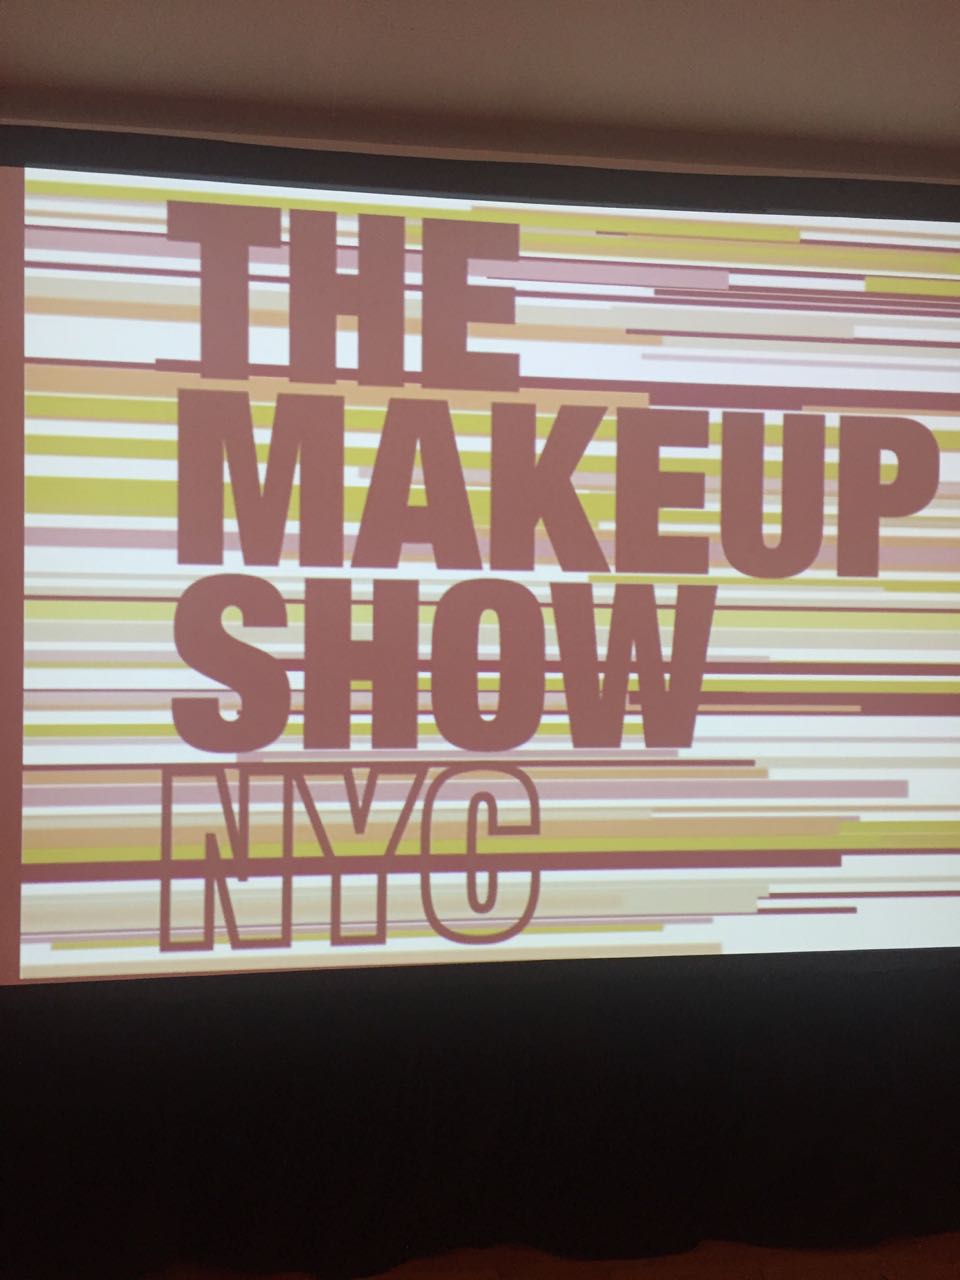 The Makeup Show Is The Largest Pro-Glam Event Worth Visiting